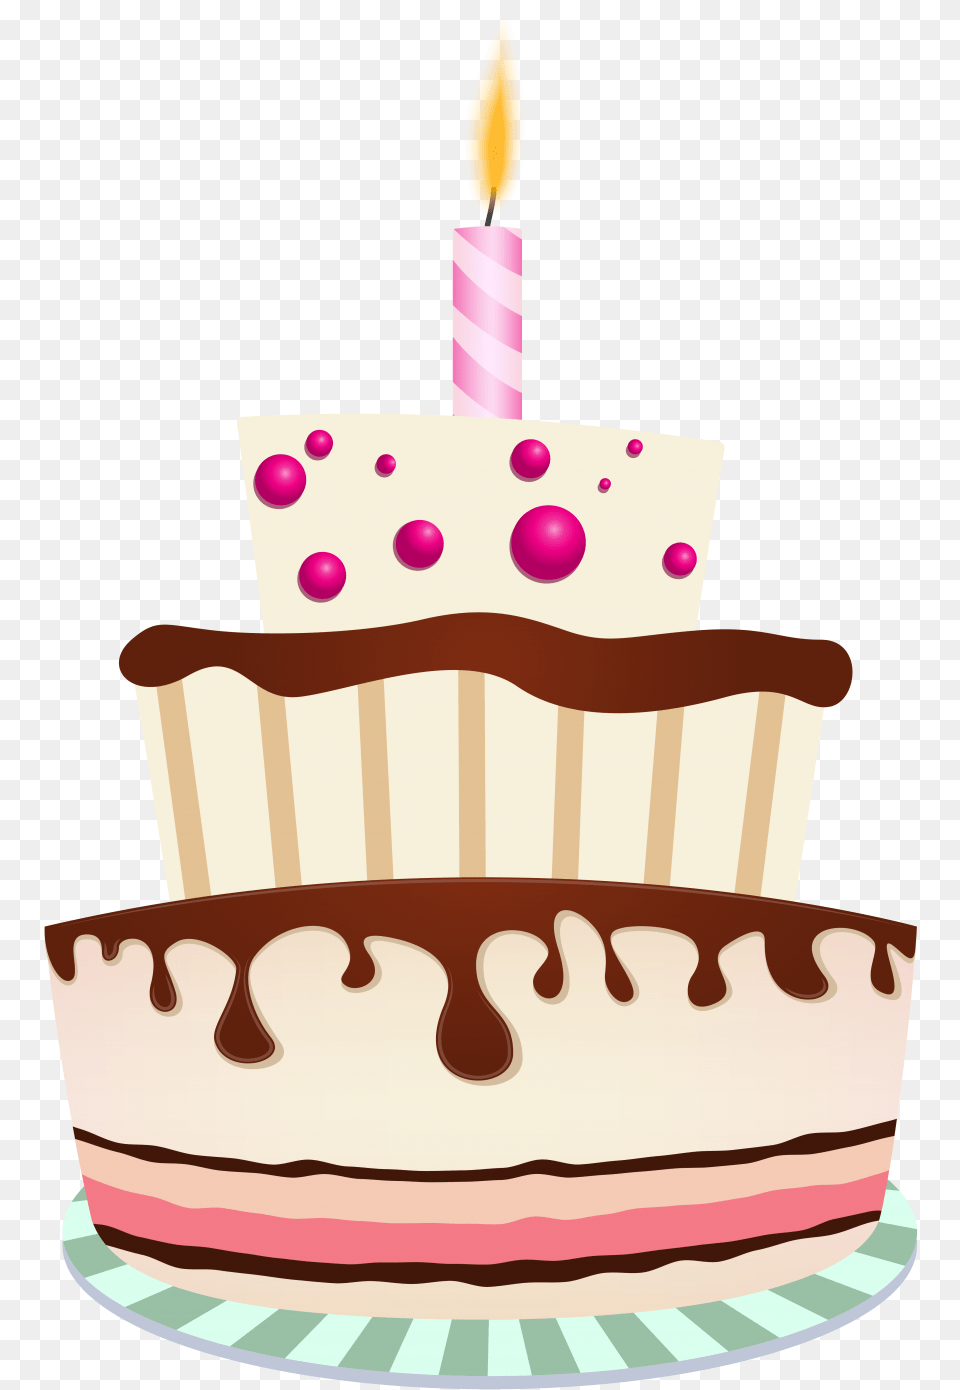 Birthday Cakes Cake With One Candle Clipart Transparent Background Birthday Cake, Birthday Cake, Food, Dessert, Cream Free Png